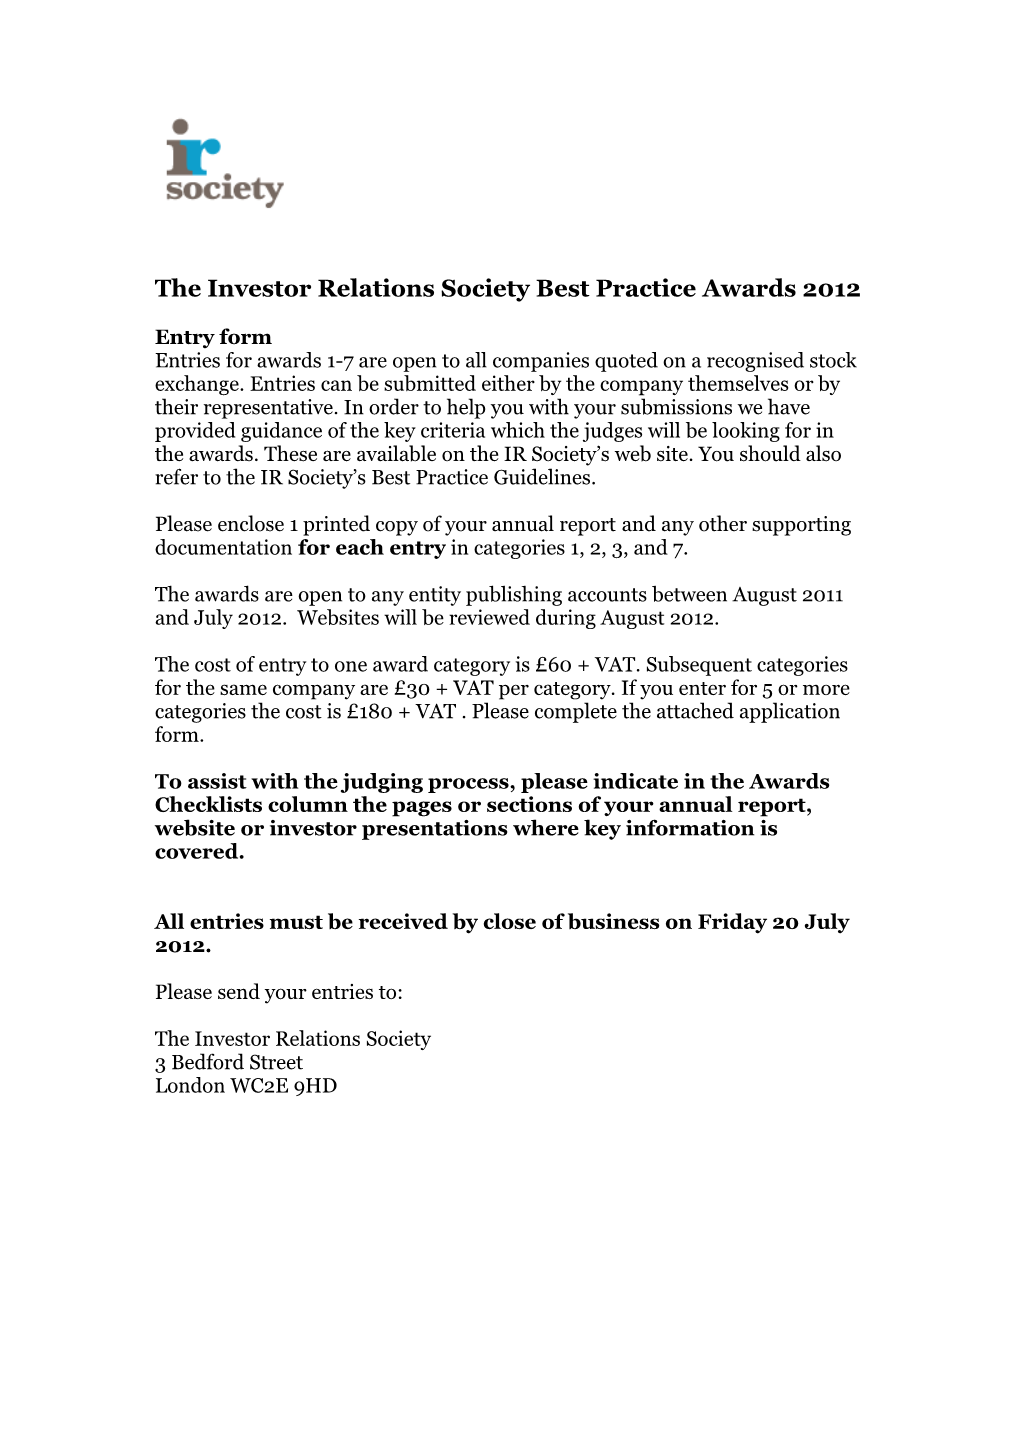 The Investor Relations Society Best Practice Awards 2012